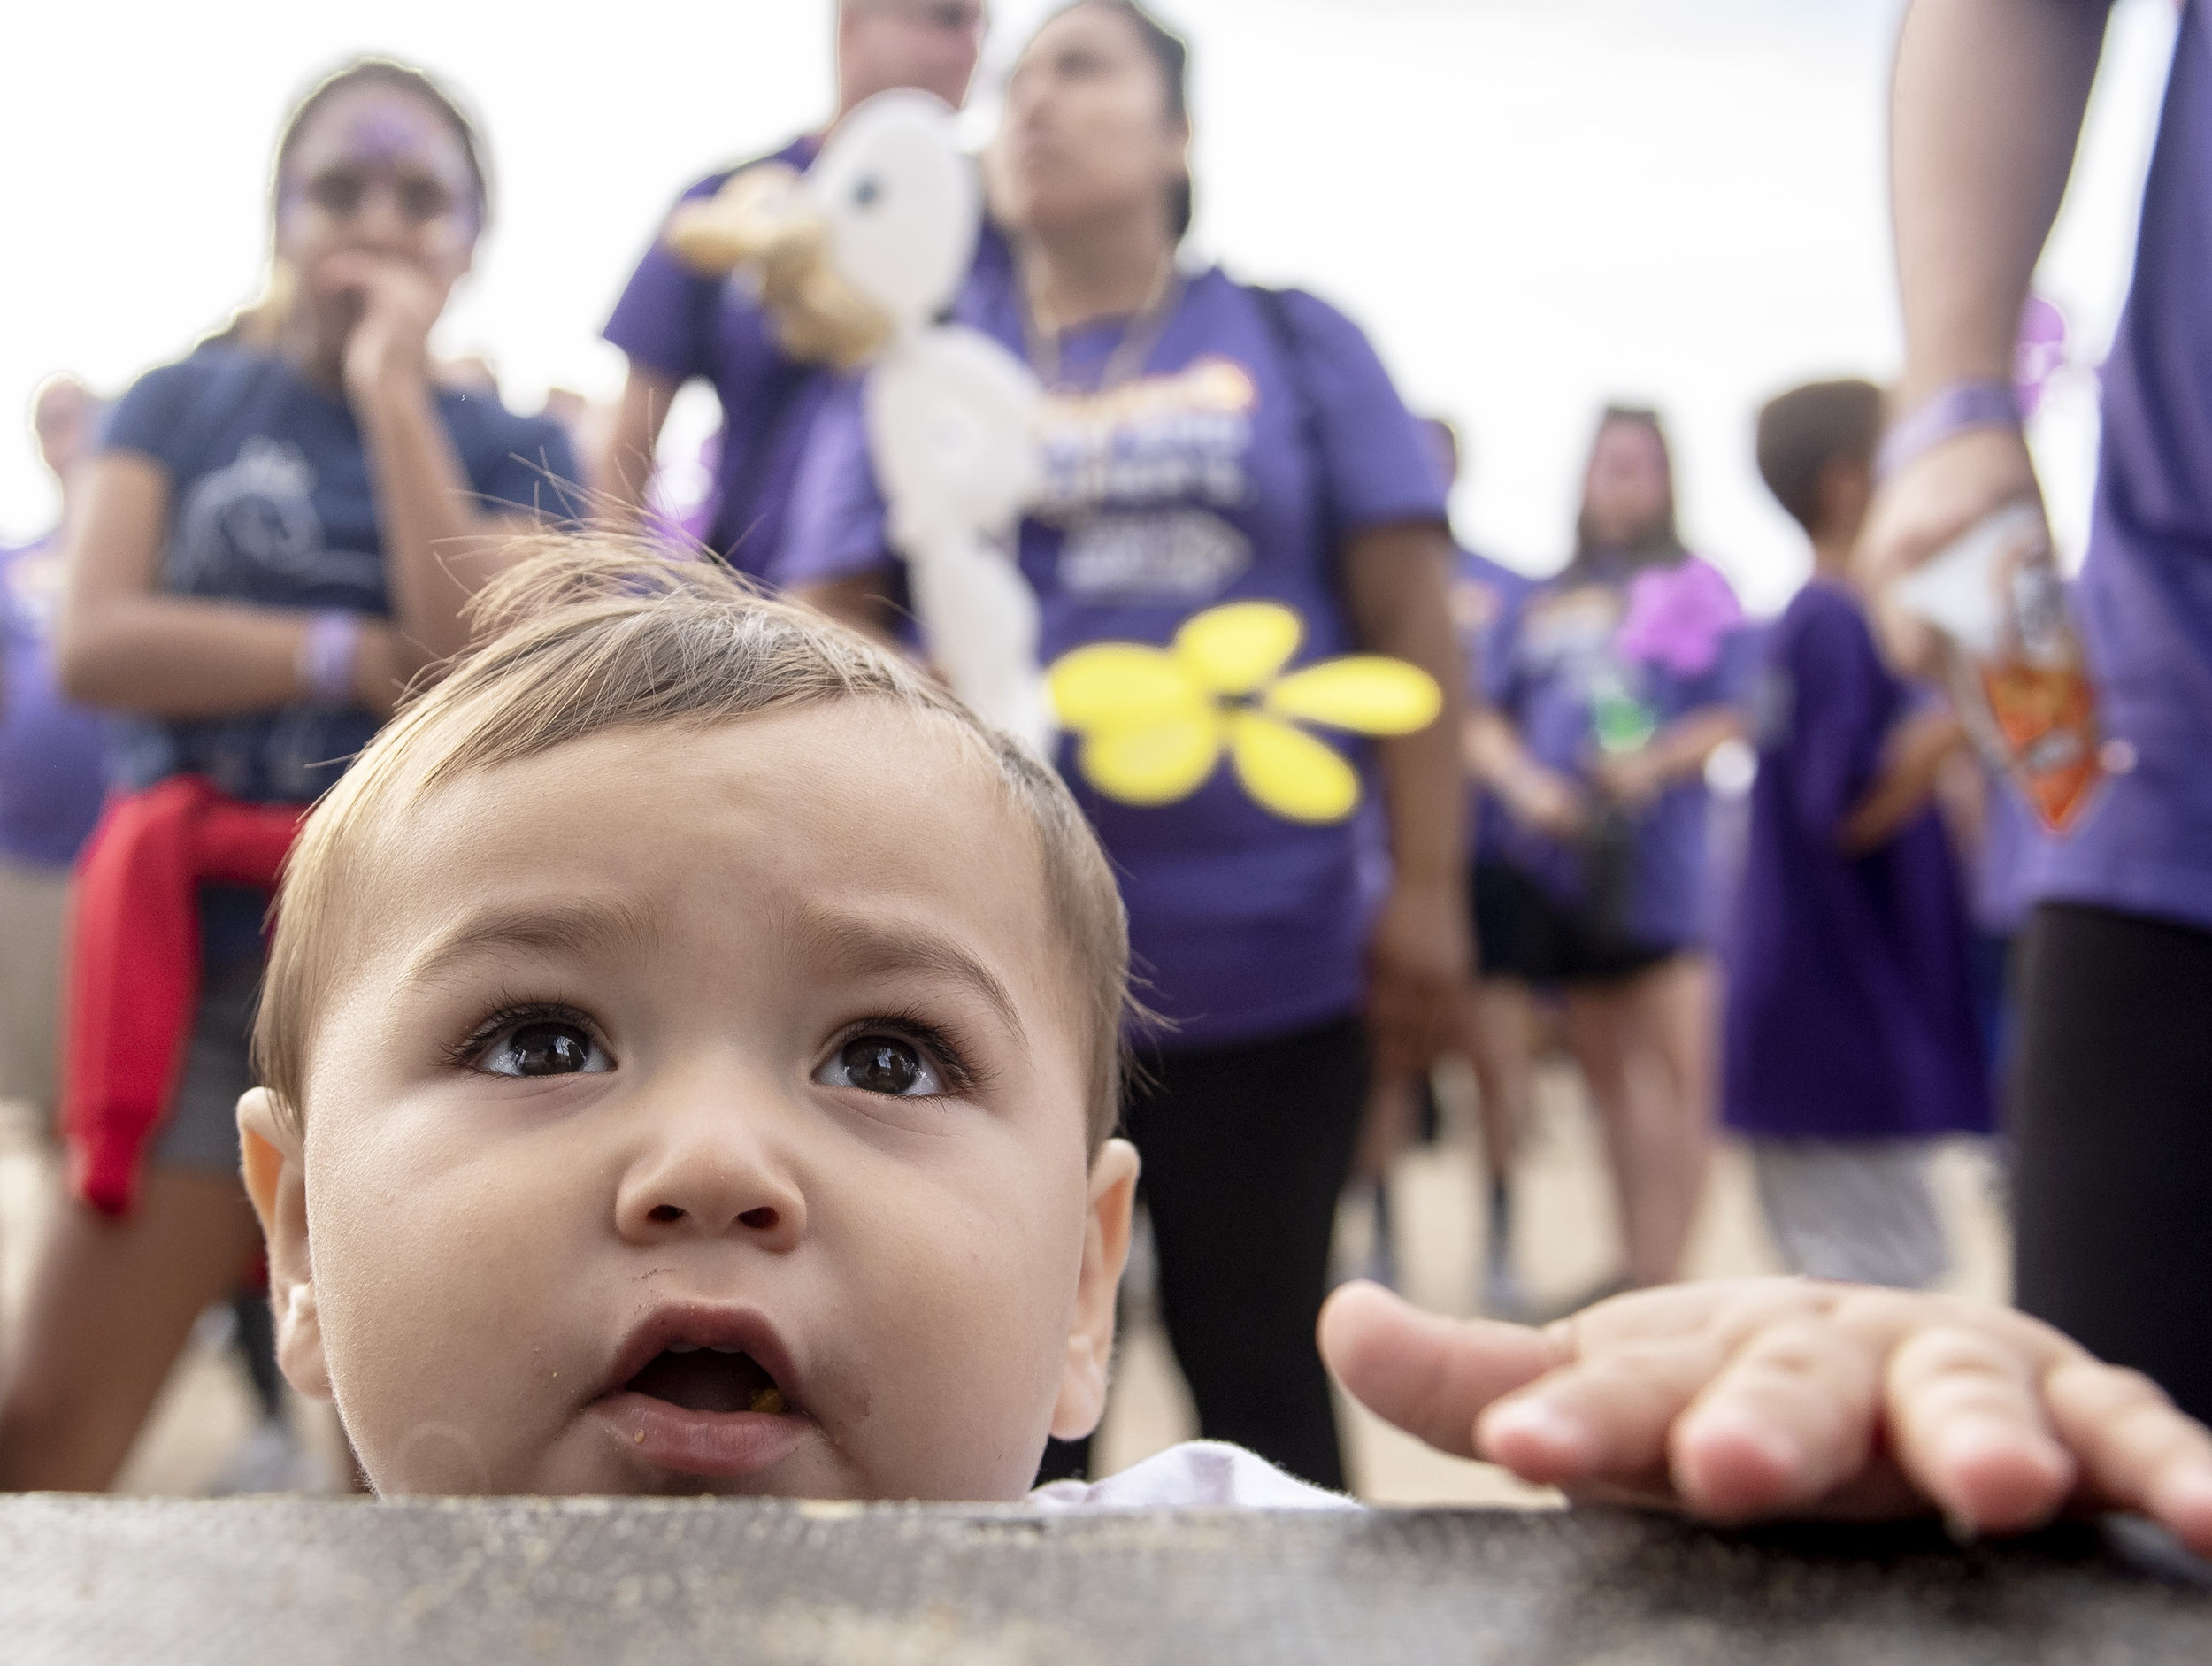  One-year-old Odin Griffiths watches the action on stage during the Walk to End Alzheimer's in Huntington Beach on Saturday, October 6, 2018. Griffiths' uncle passed away last July after a 3-year struggle with the disease. (Photo by Mindy Schauer, Or